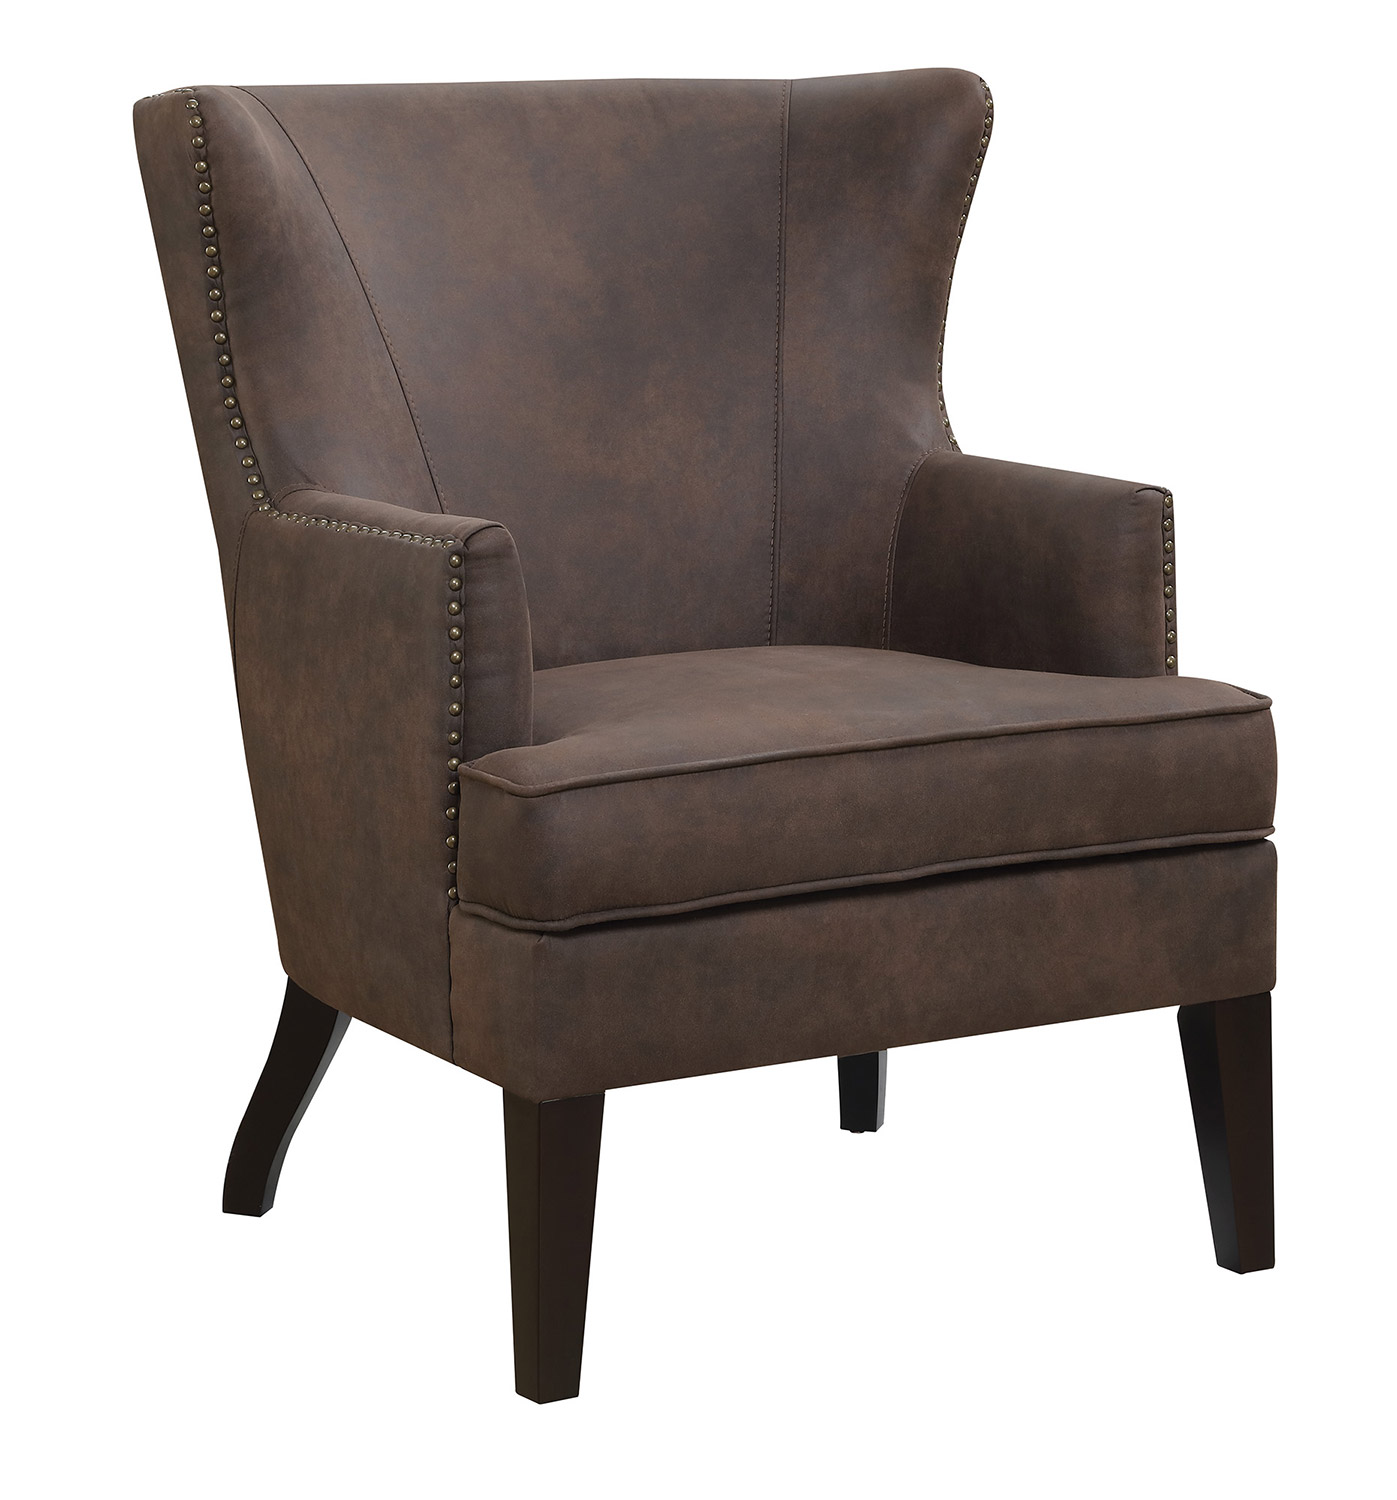 Coaster 903817 Accent Chair - Brown